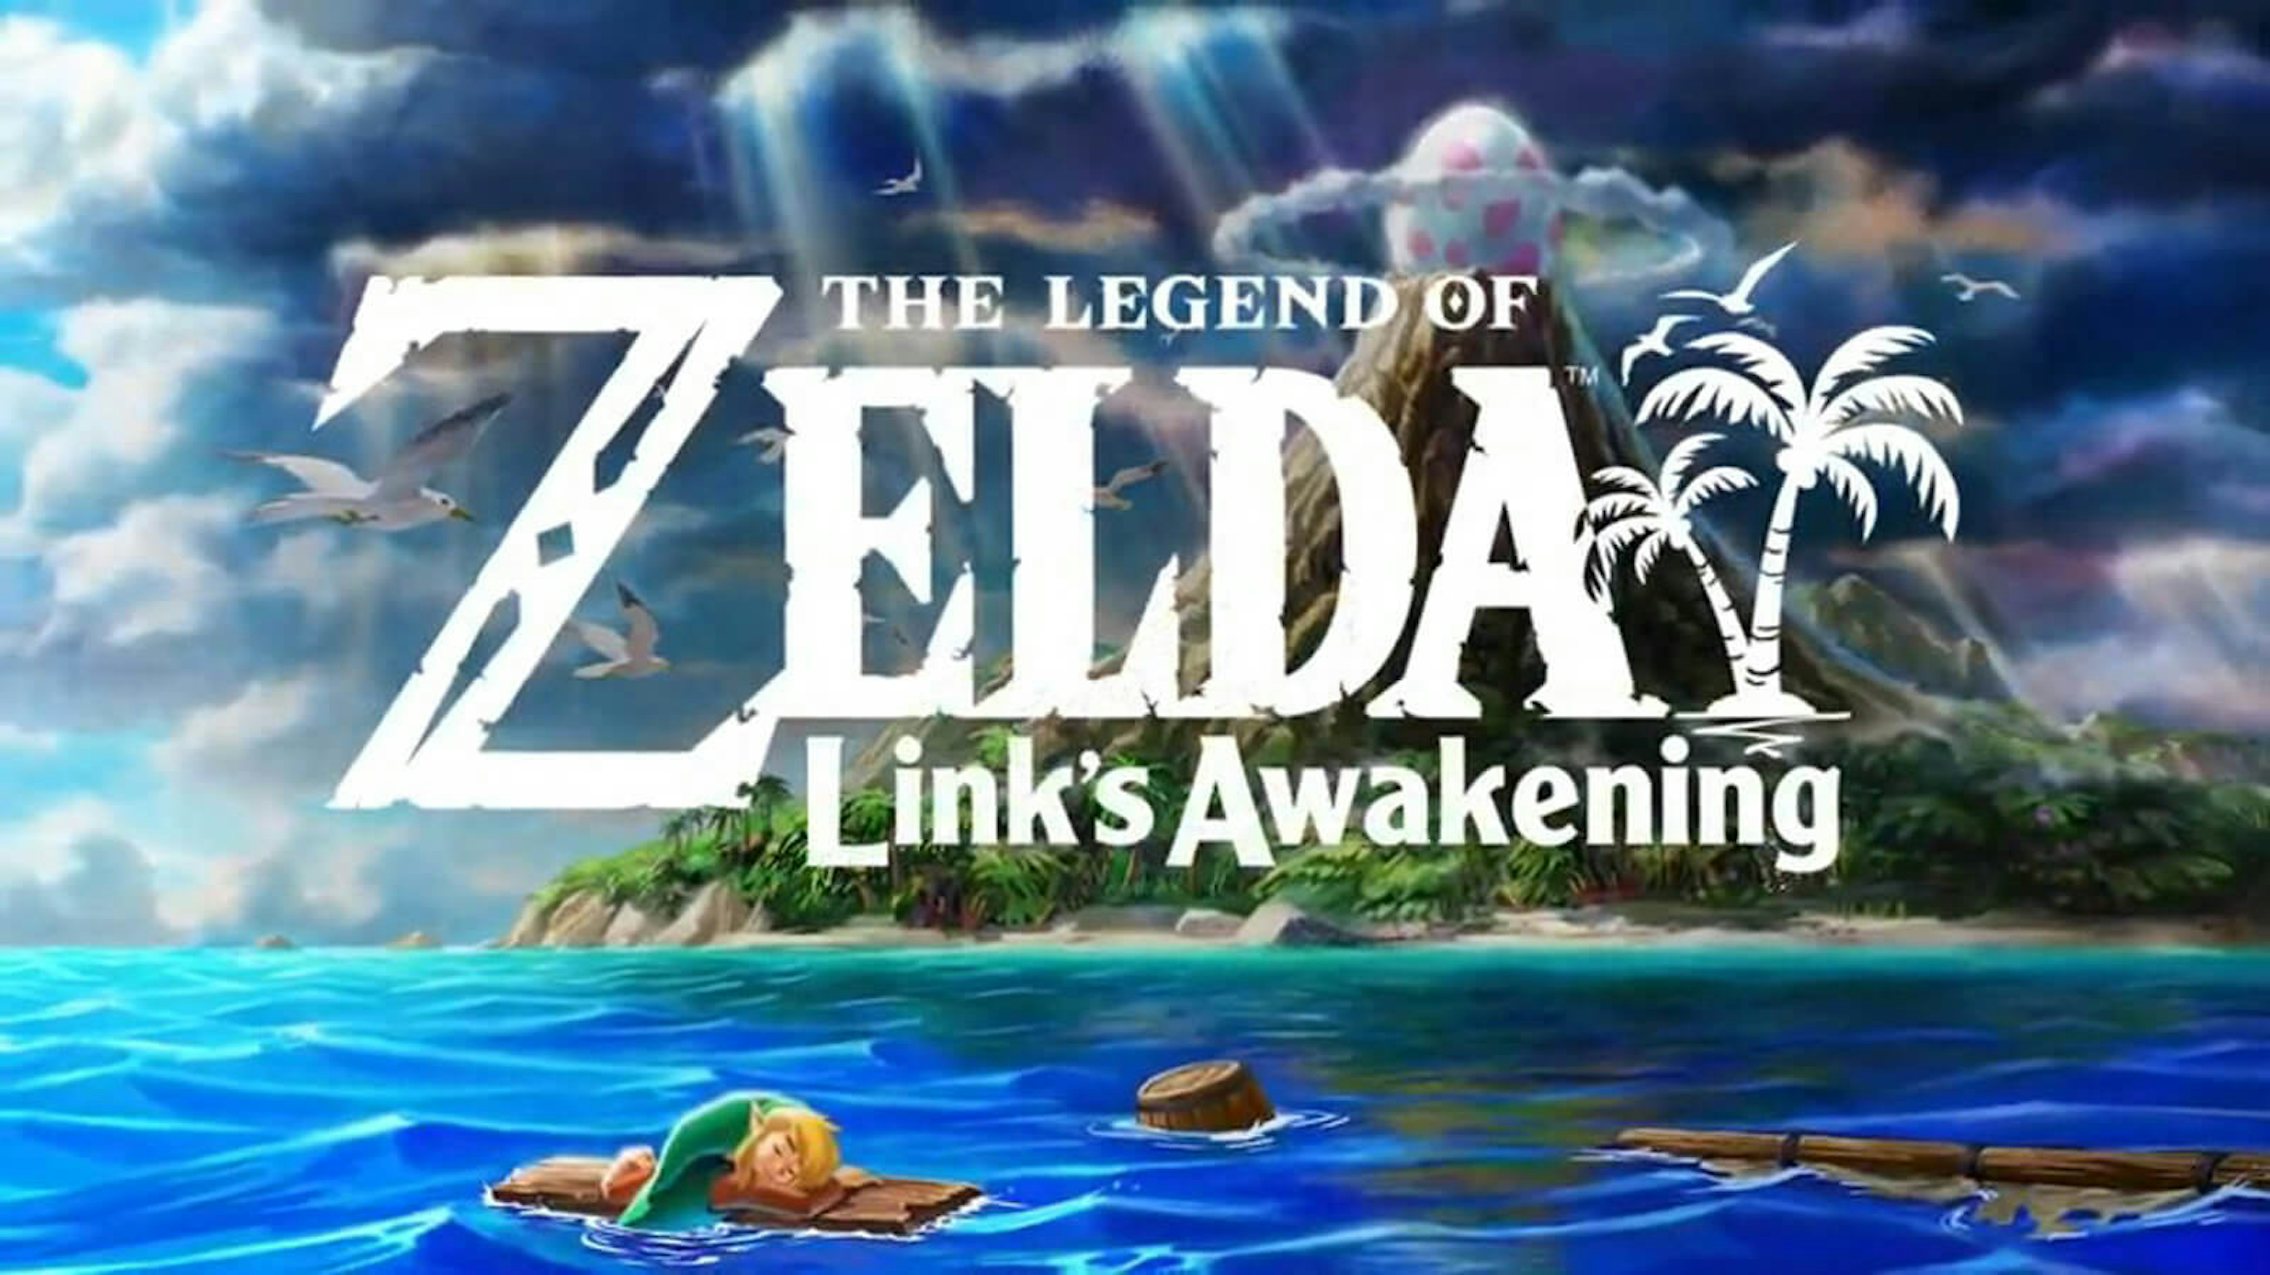 The Legend of Zelda: Link's Awakening (Switch) review – Tired Old Hack